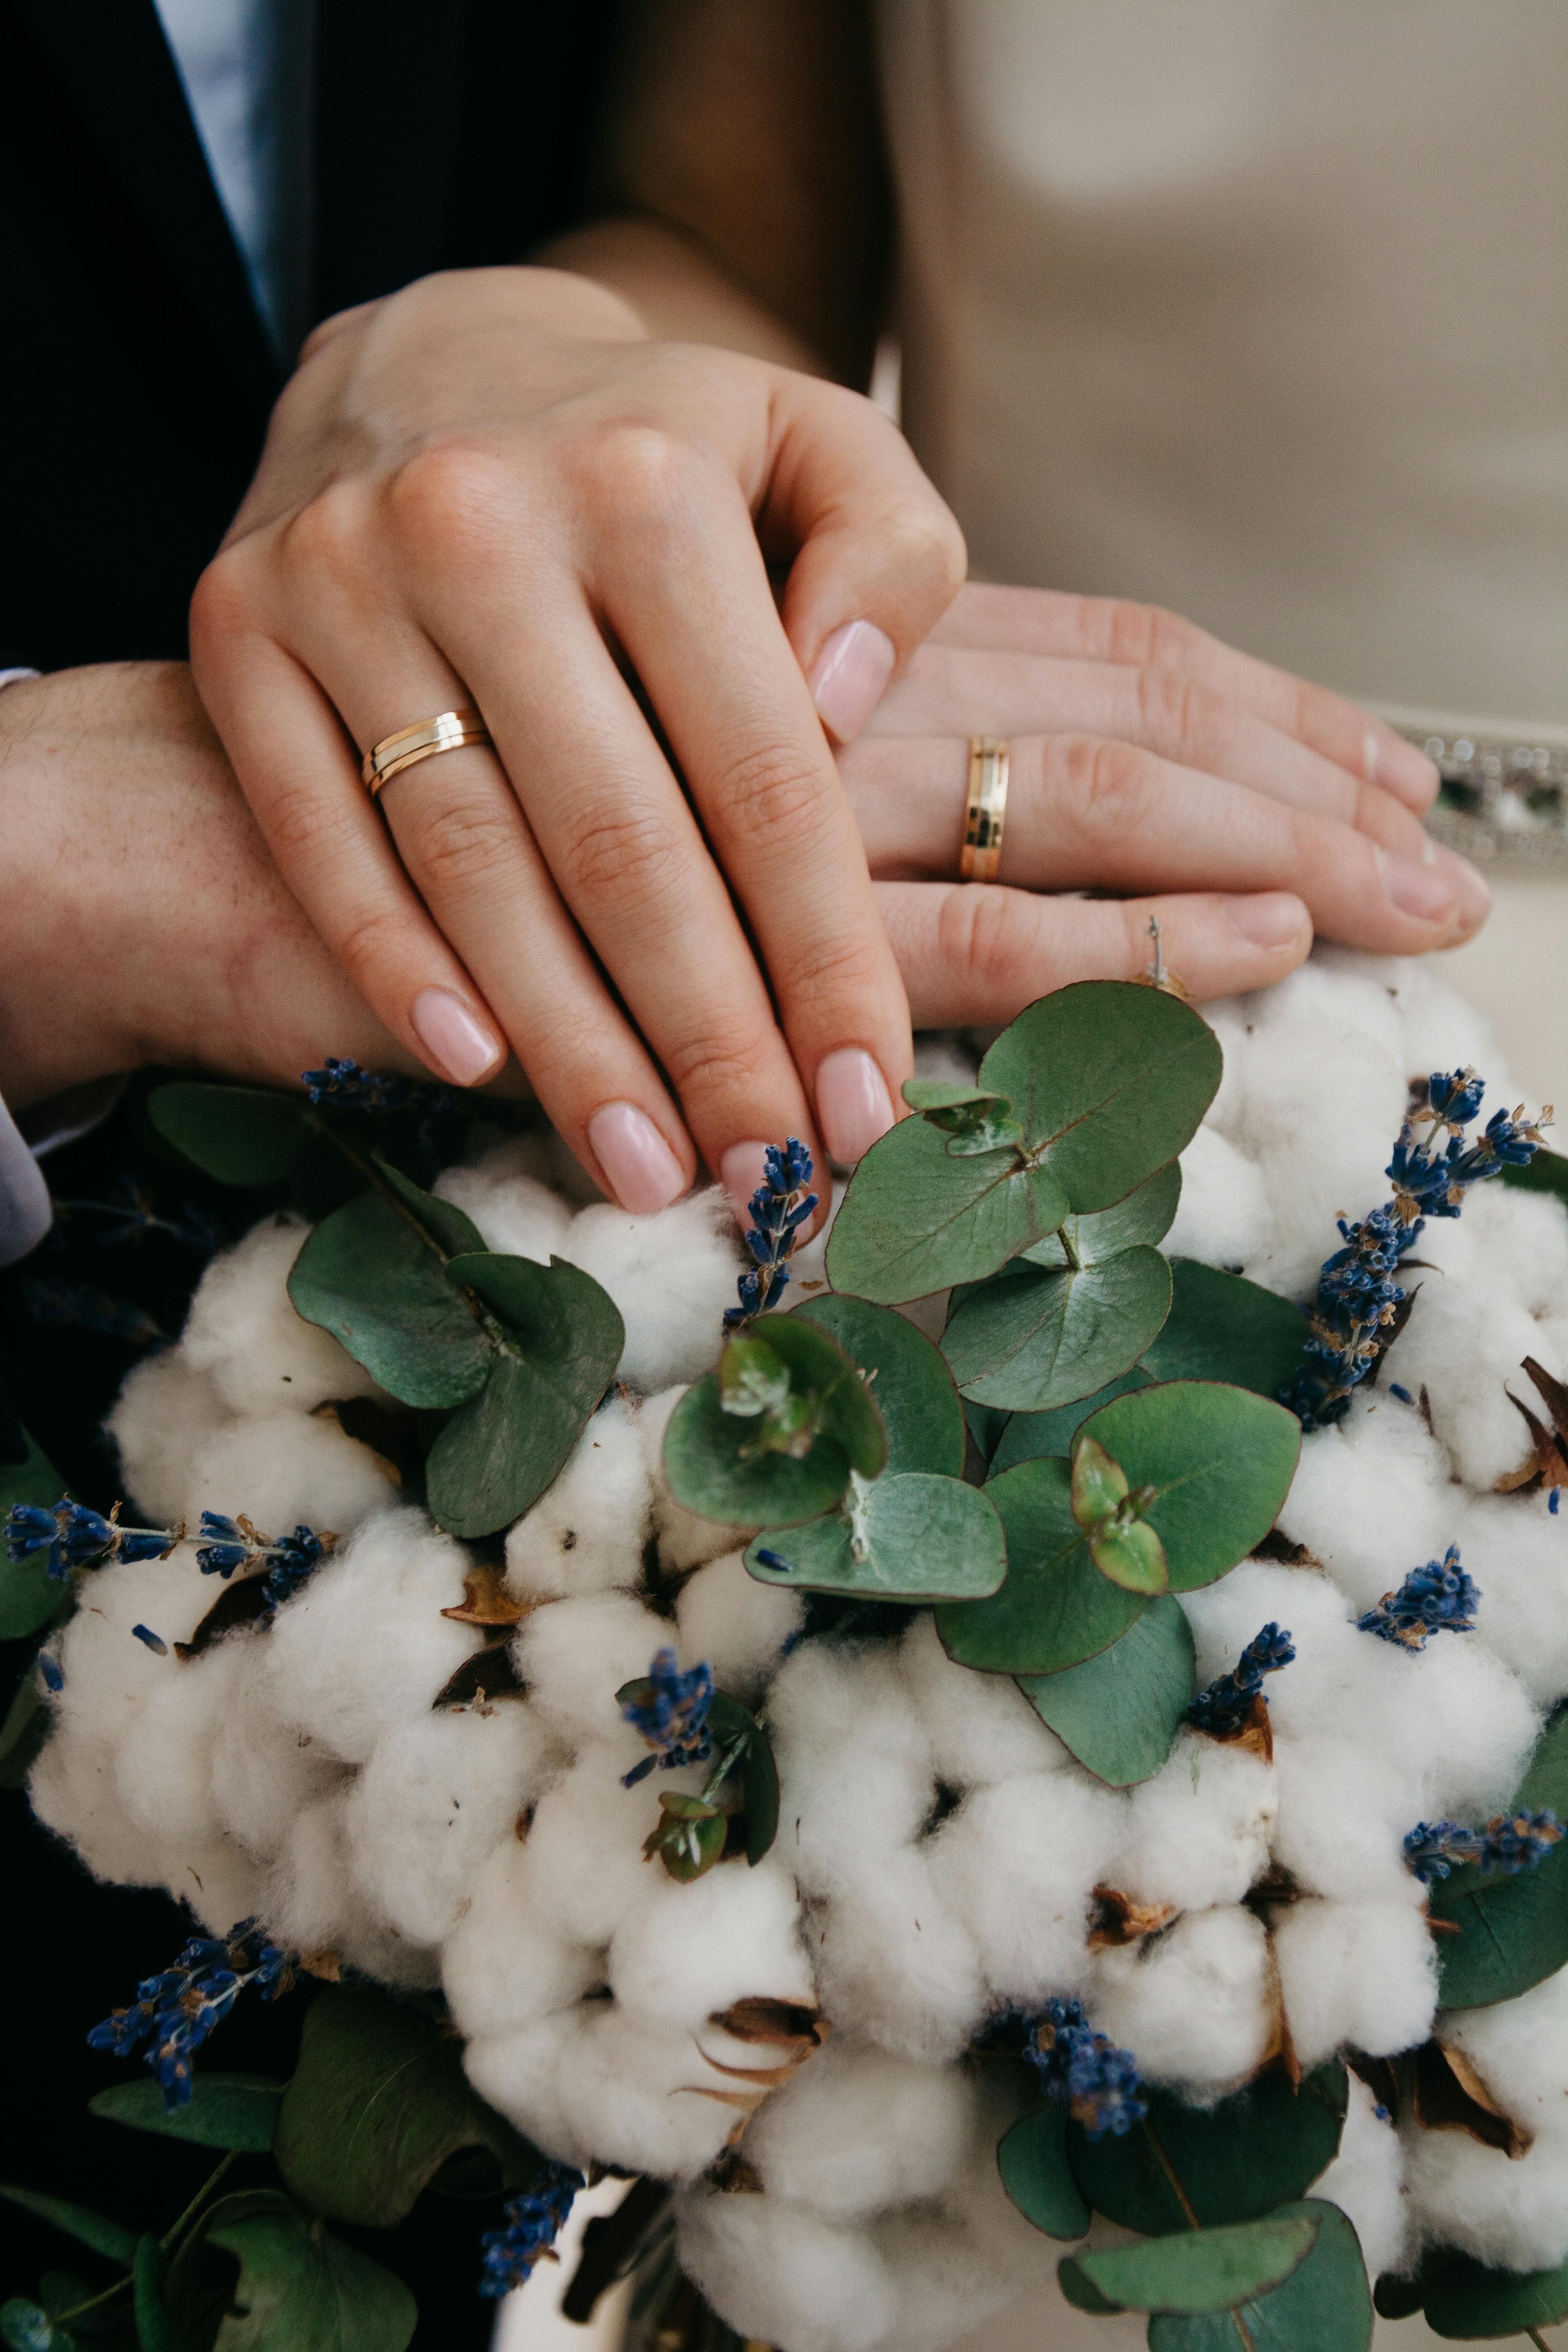 For illustration purposes only. A couple showing off their wedding bouquet and rings | Source: Pexels